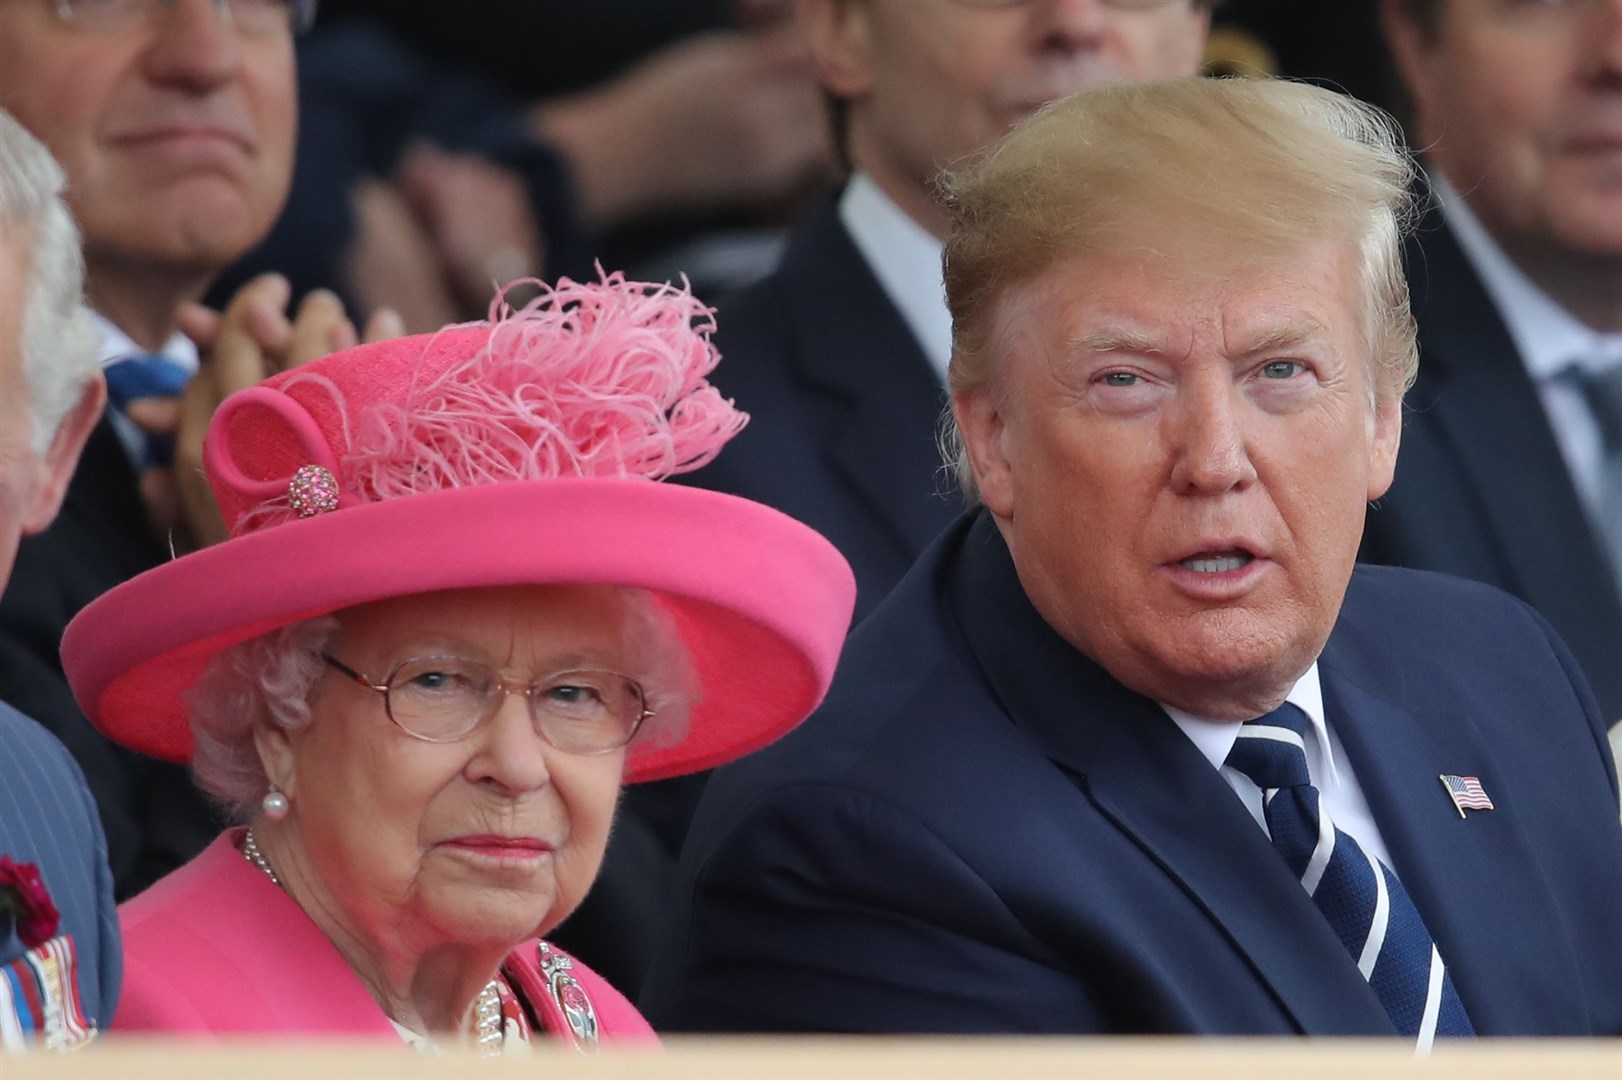 The Queen and Donald Trump during the commemorations for the 75th Anniversary of the D-Day landings during one of the former president’s visits (Andrew Matthews/PA)